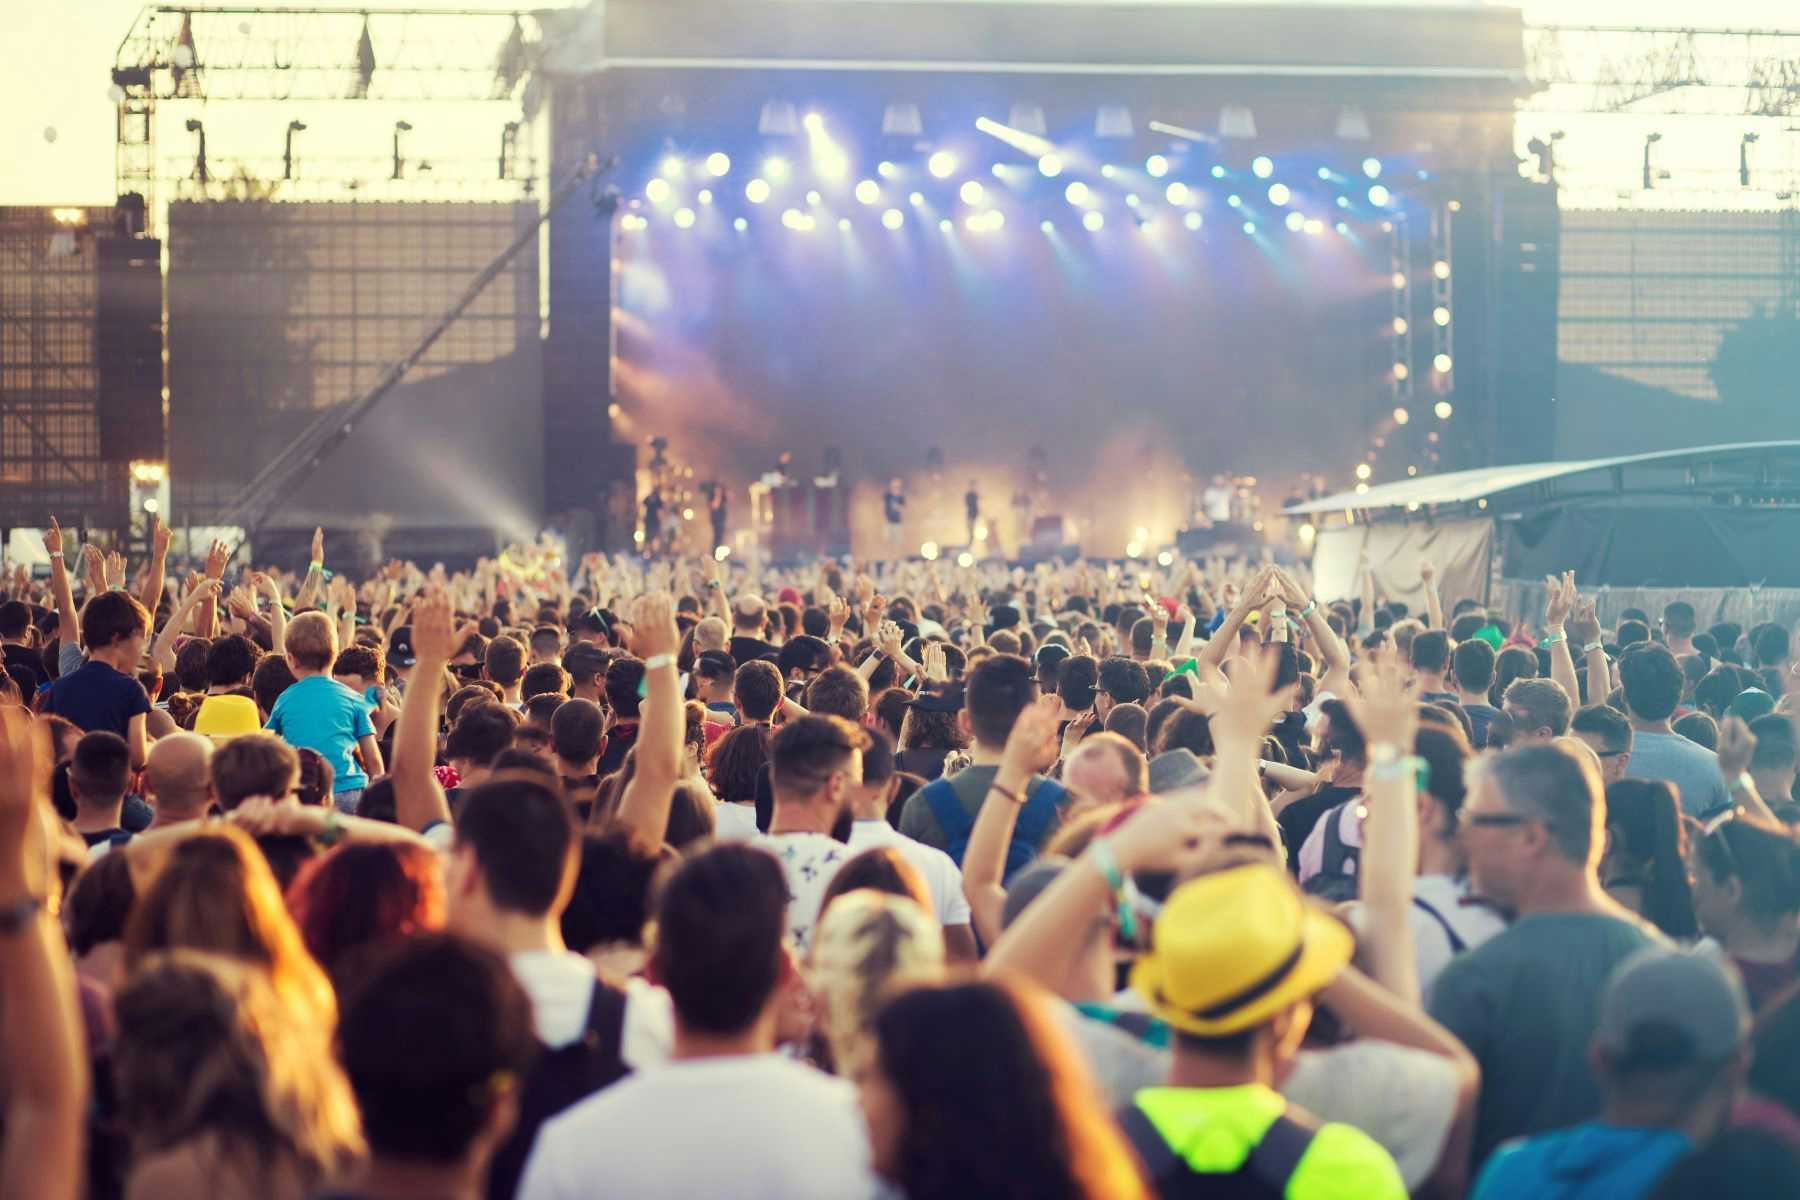 Collapsed Stage Light at Music Festival Causes Traumatic Brain Injury